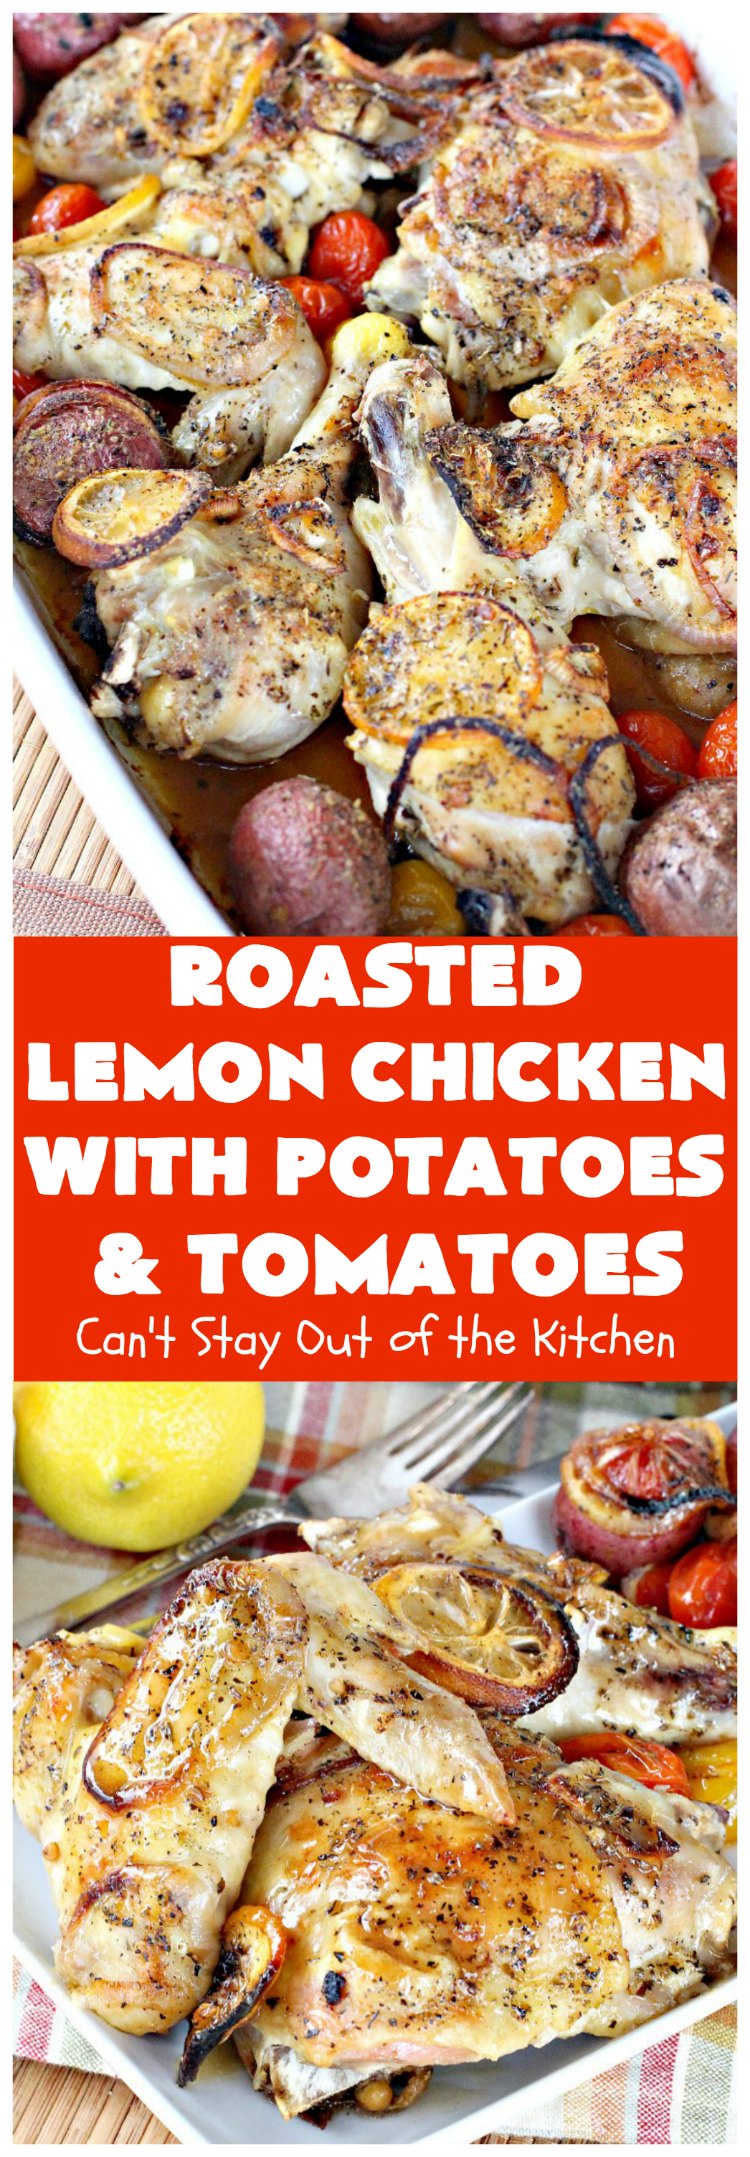 Roasted Lemon Chicken with Potatoes and Tomatoes | Can't Stay Out of the Kitchen